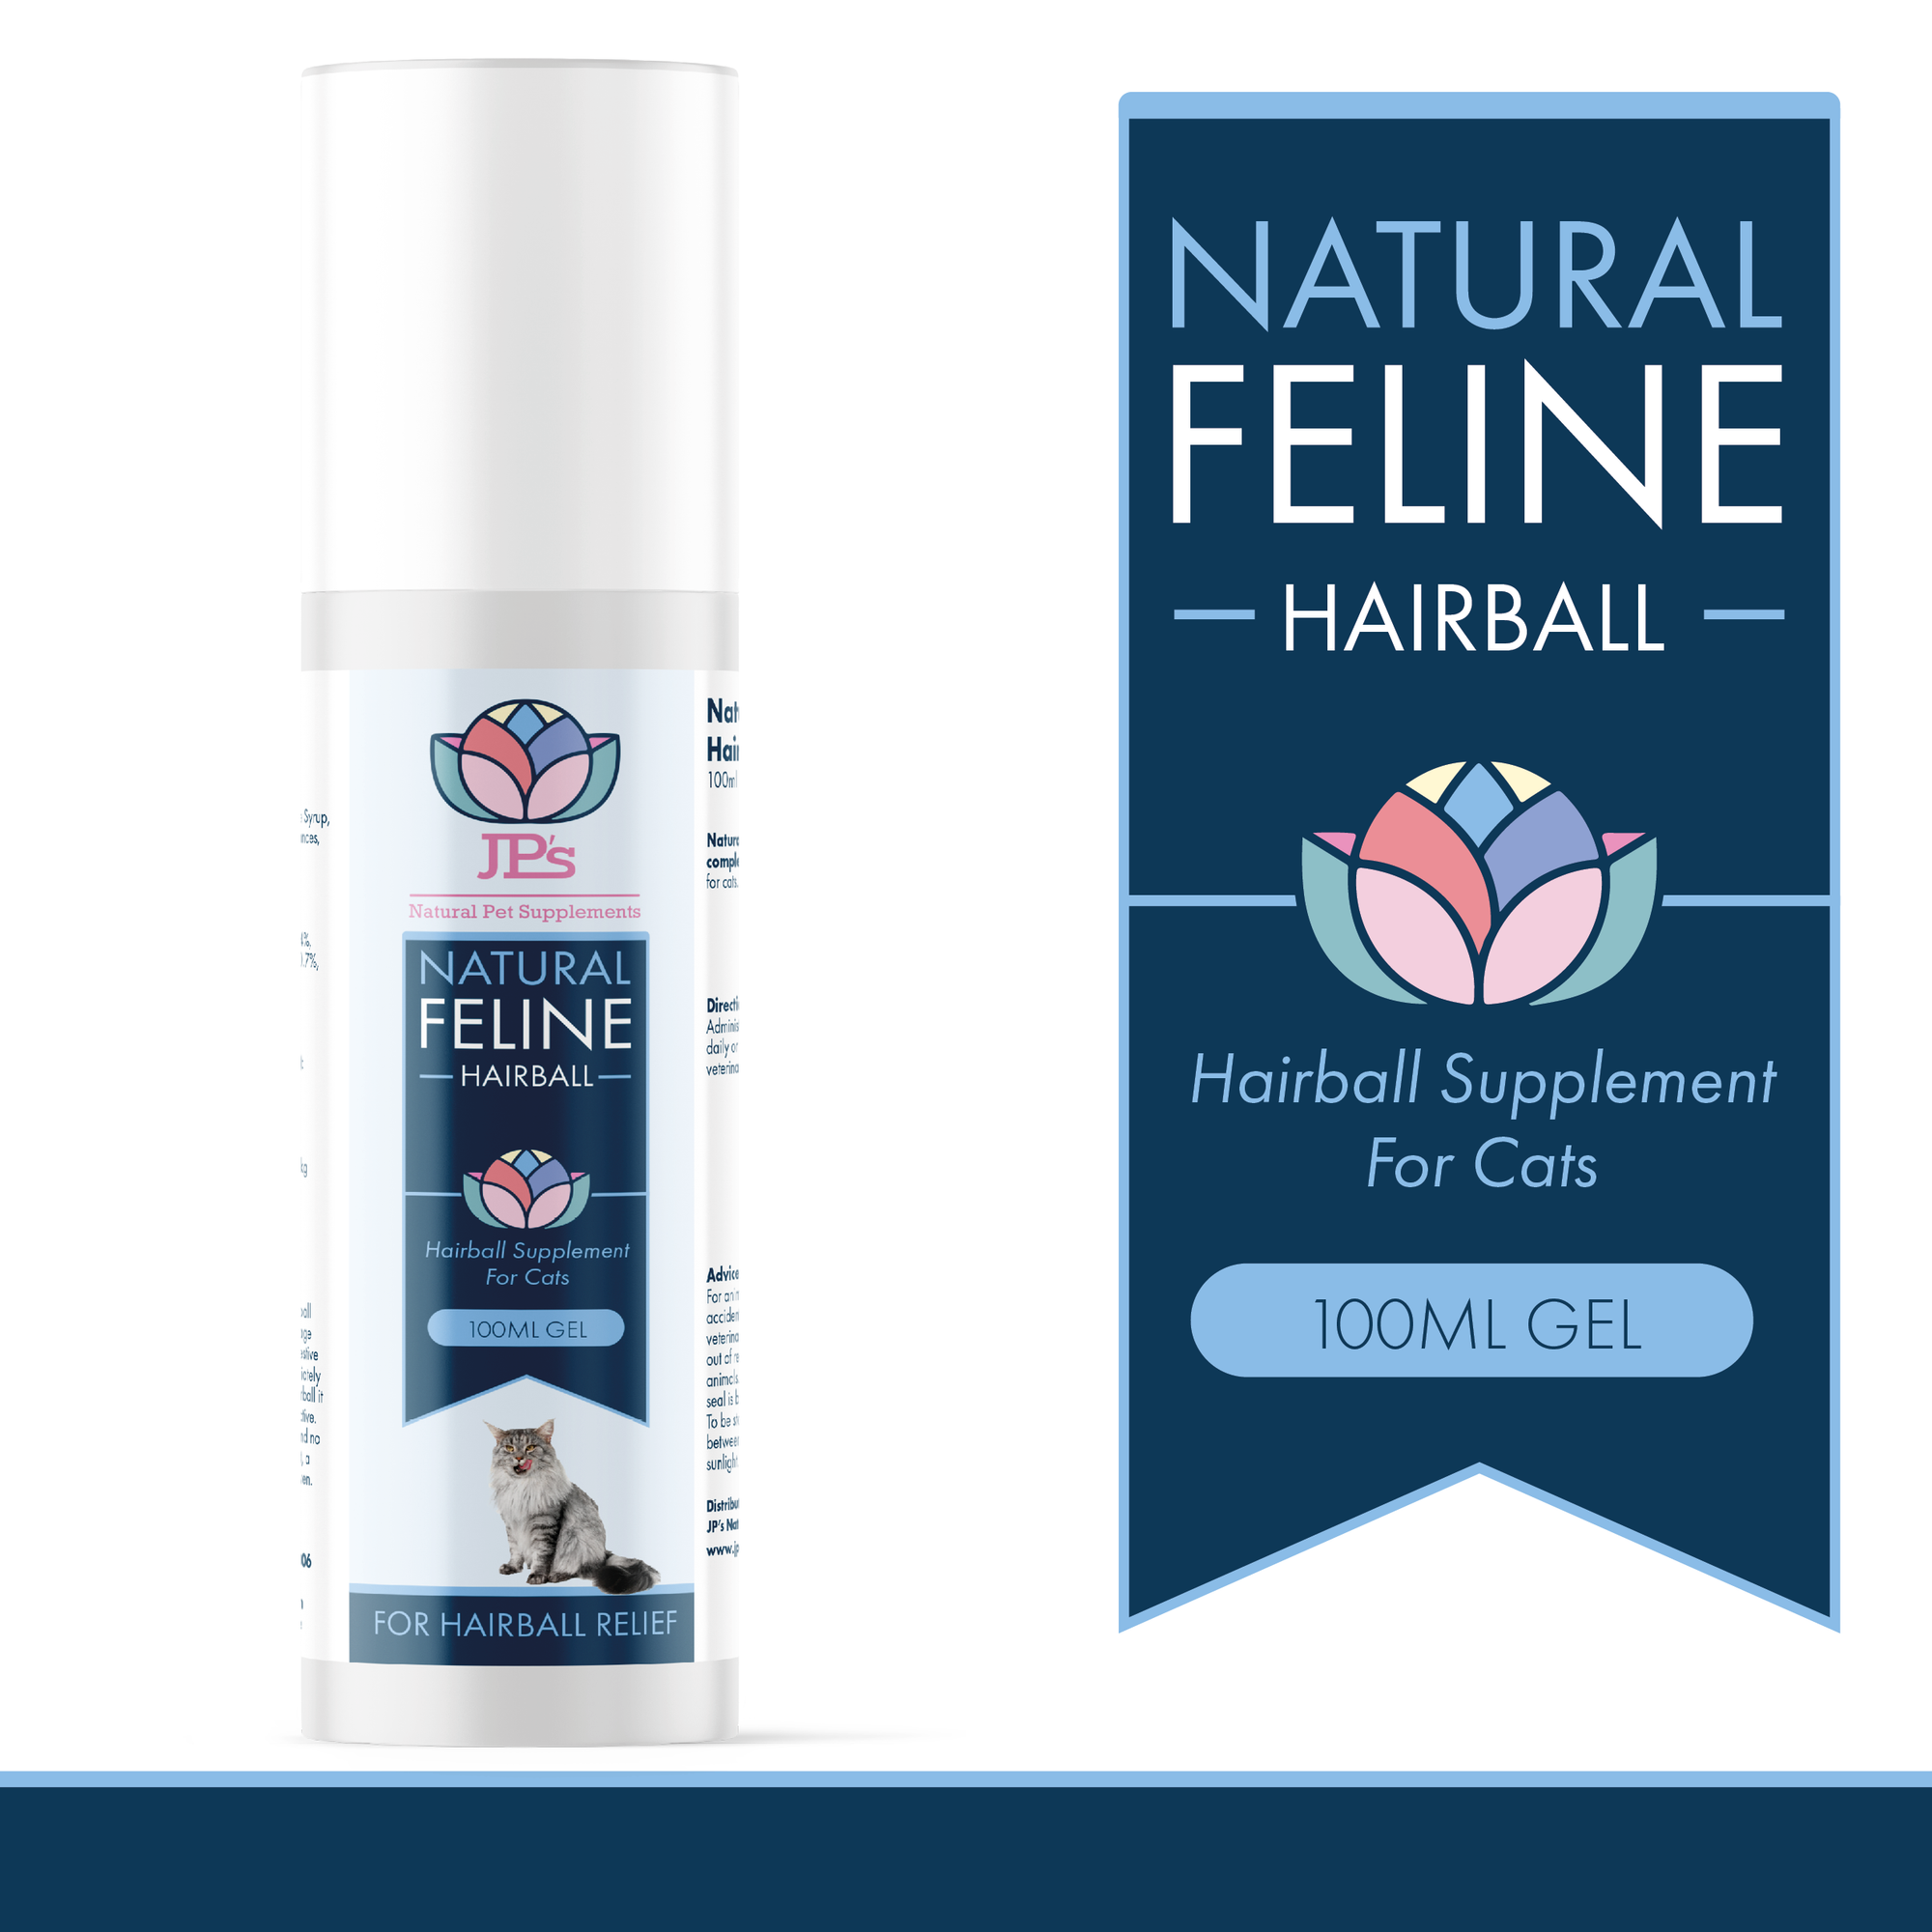 Natural hairball remedy for cats